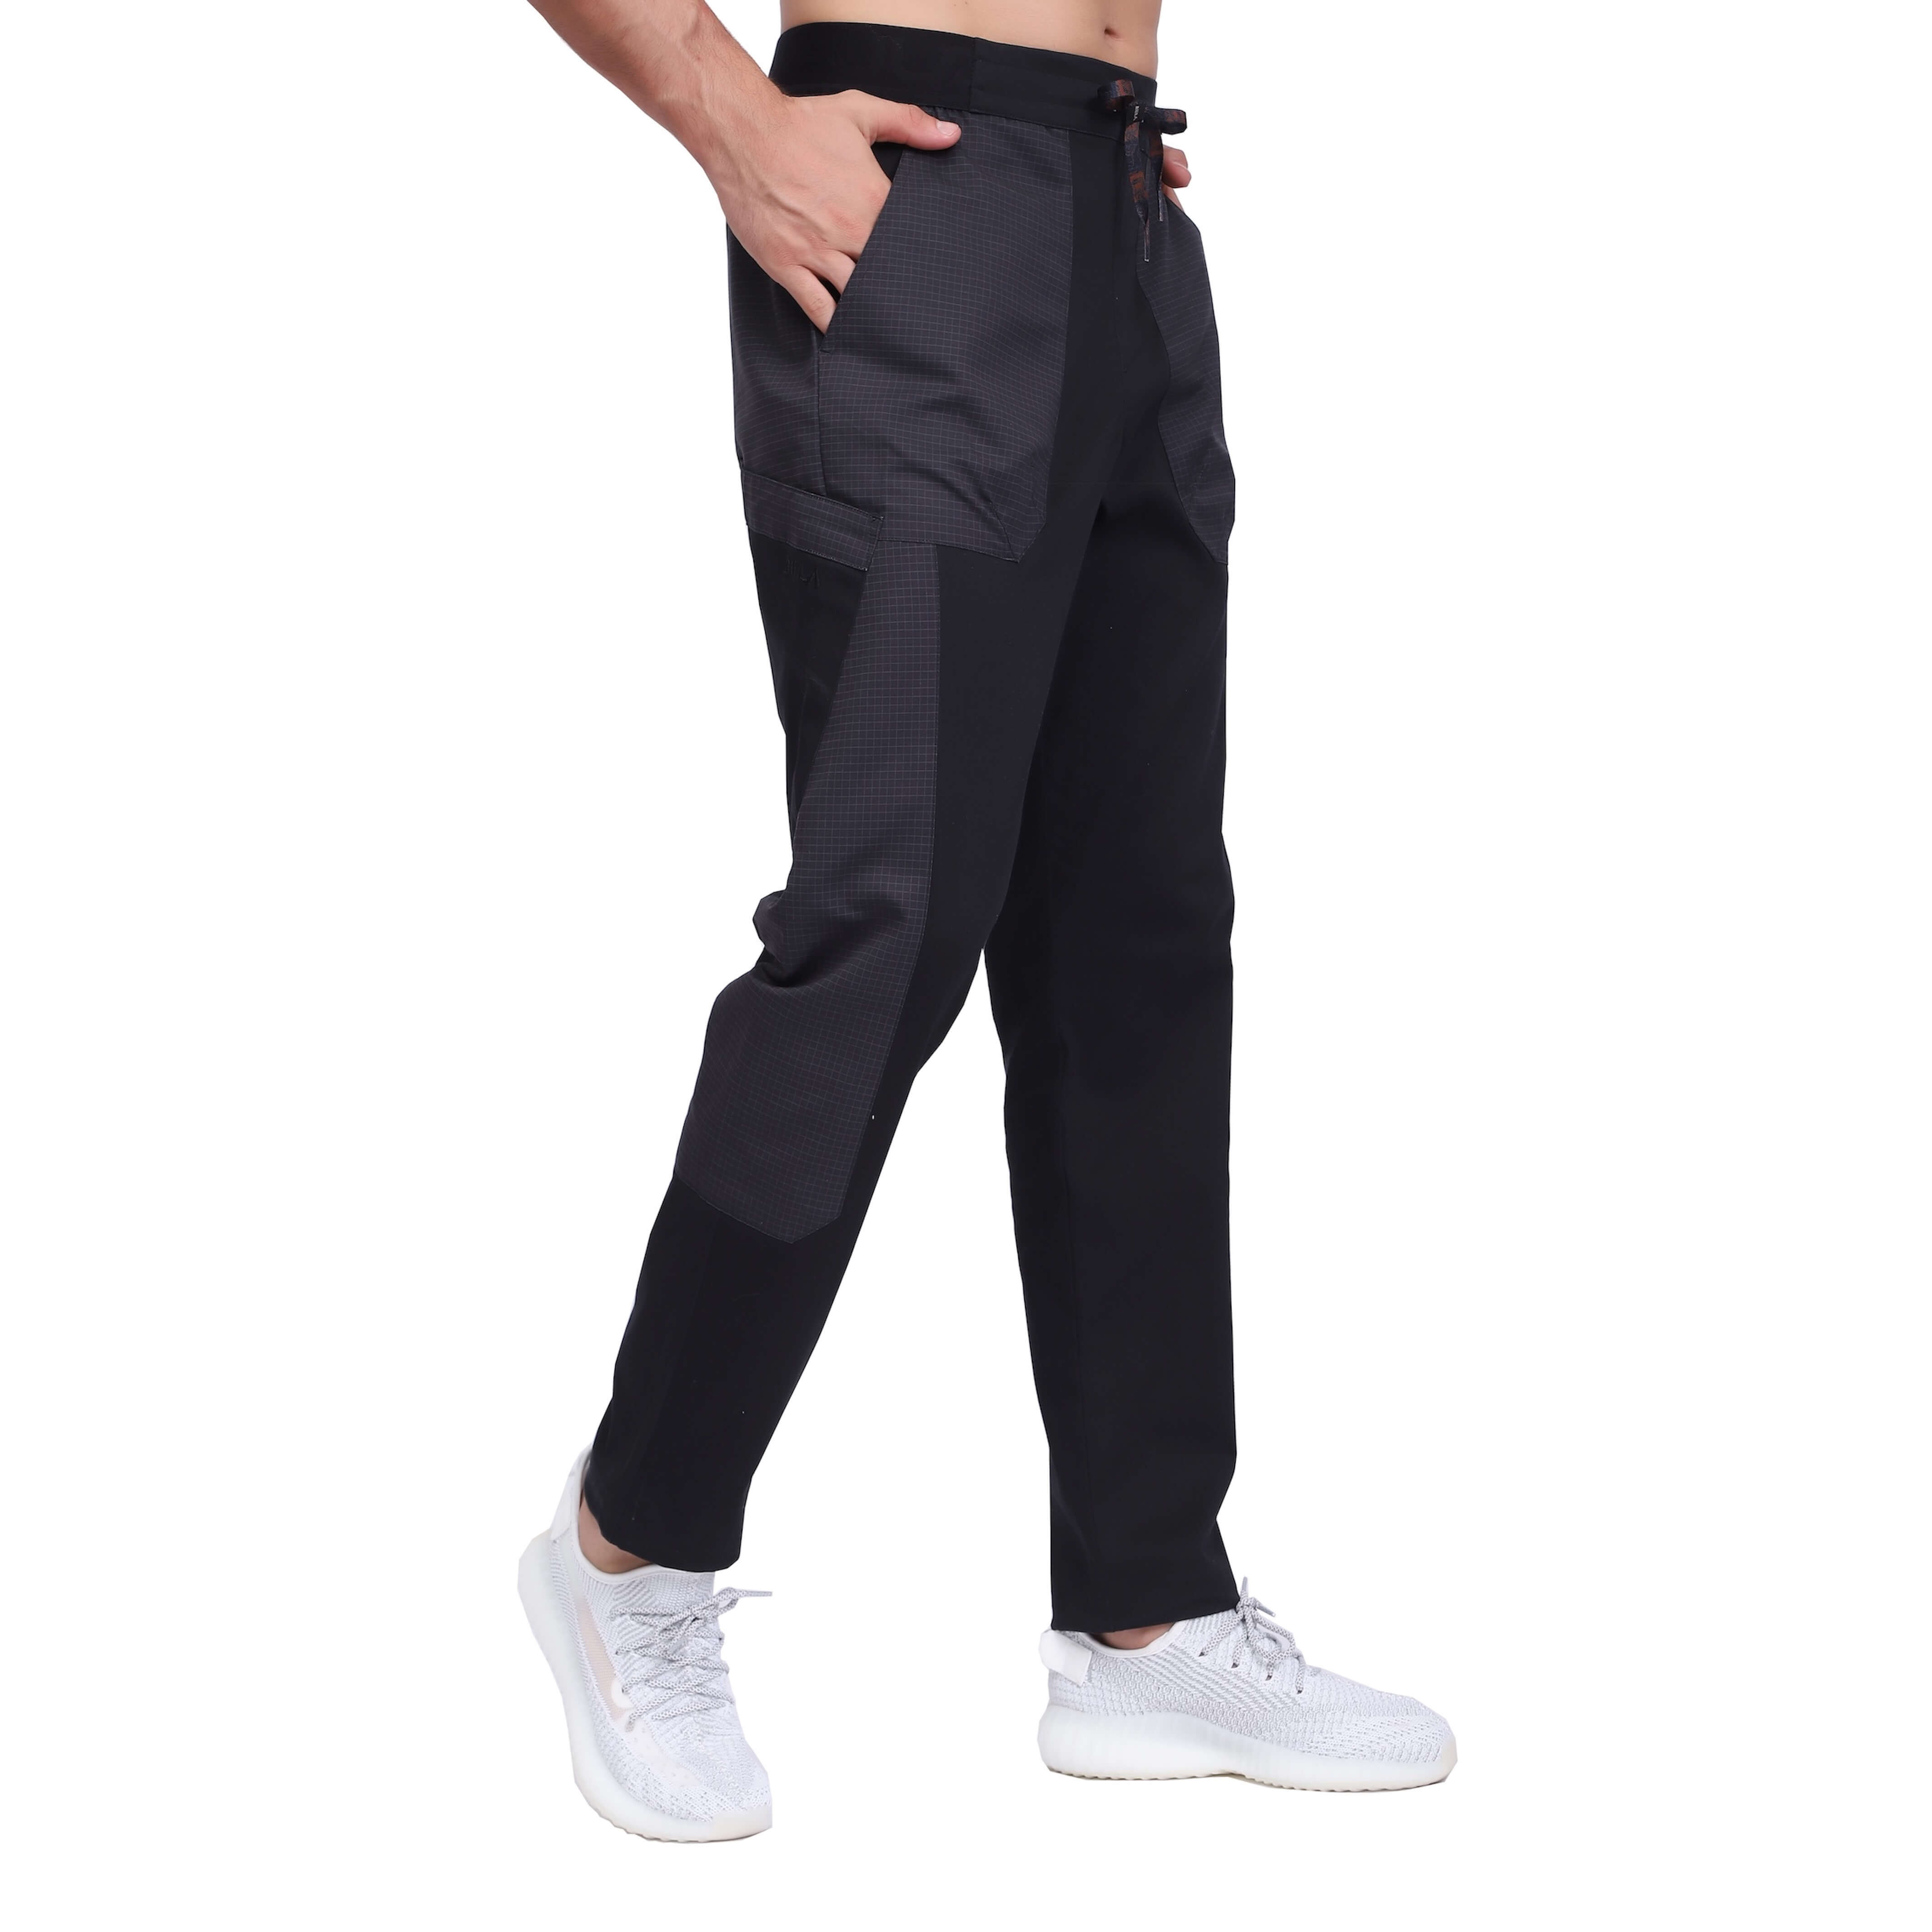 Men's Black Casual Outdoor Breathable Hiking Walking Trousers 